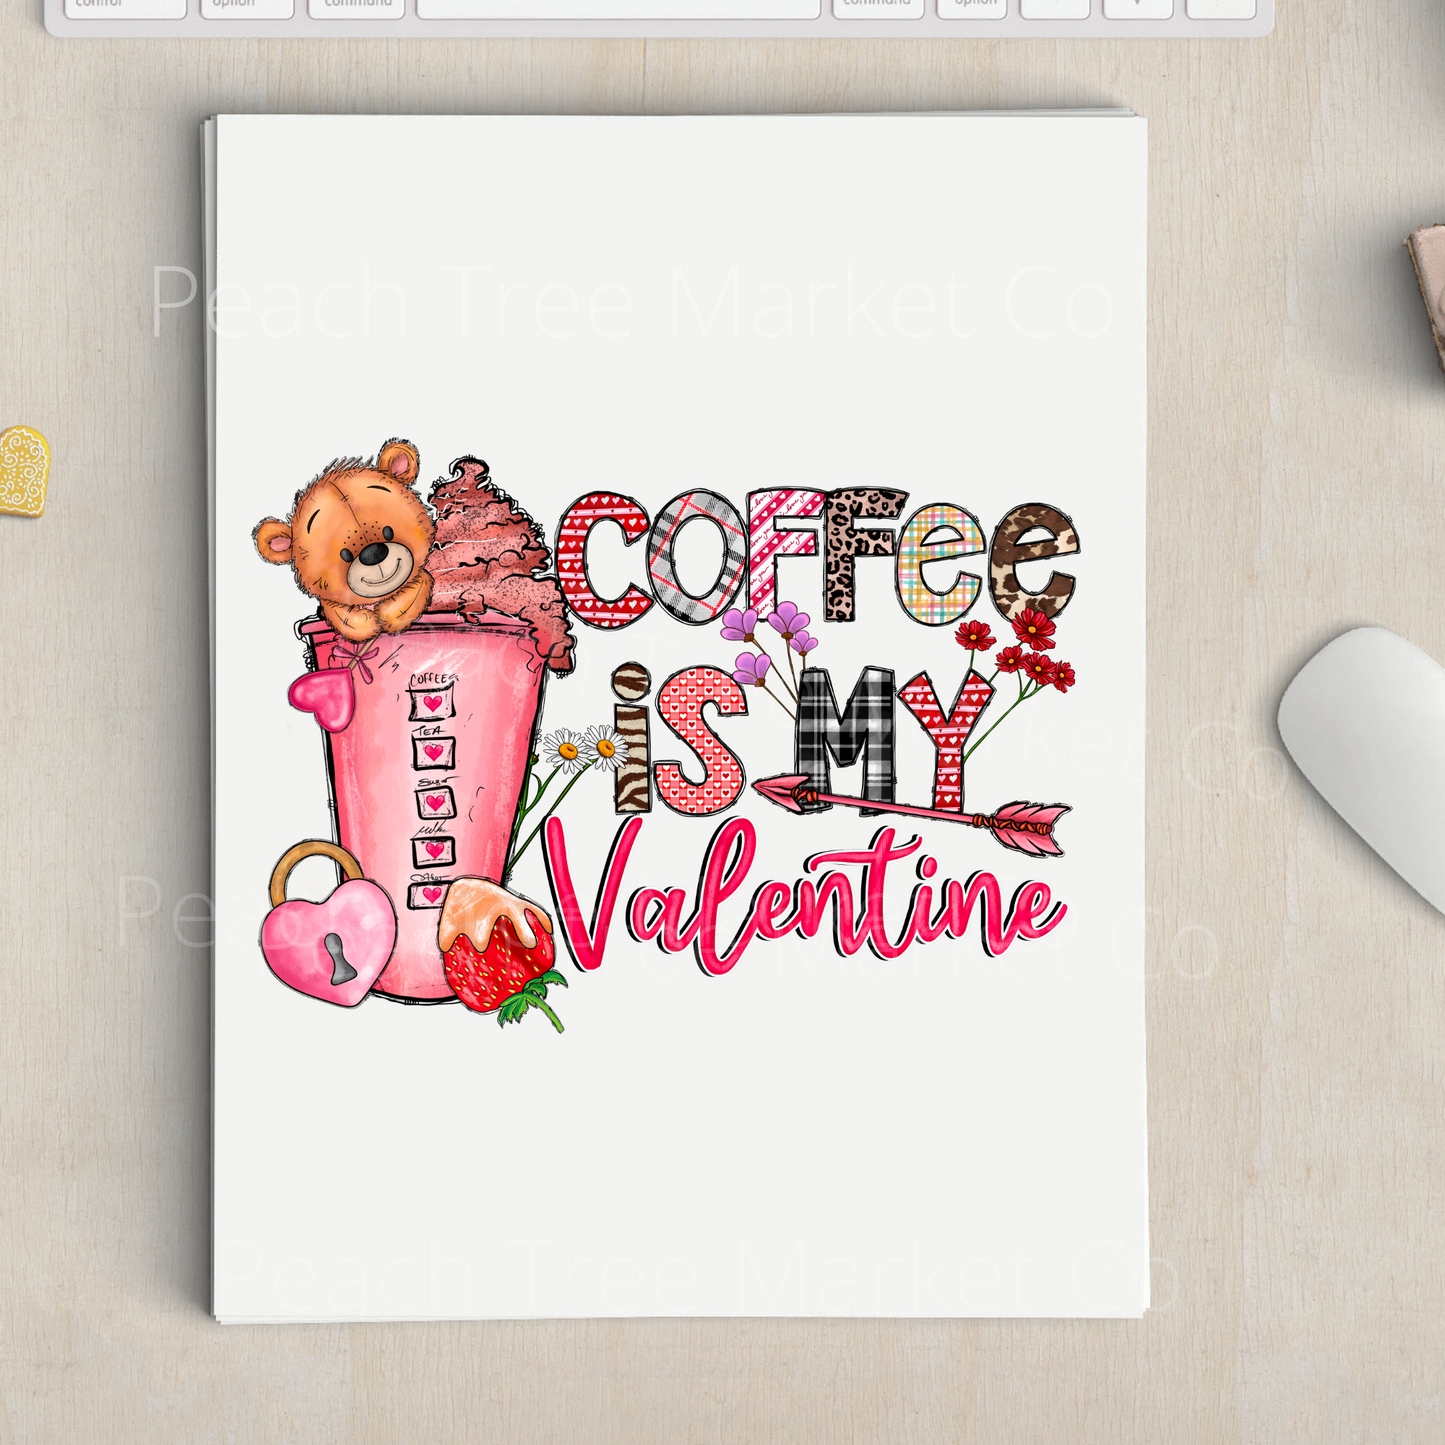 Coffee Is My Valentine Sublimation Transfer